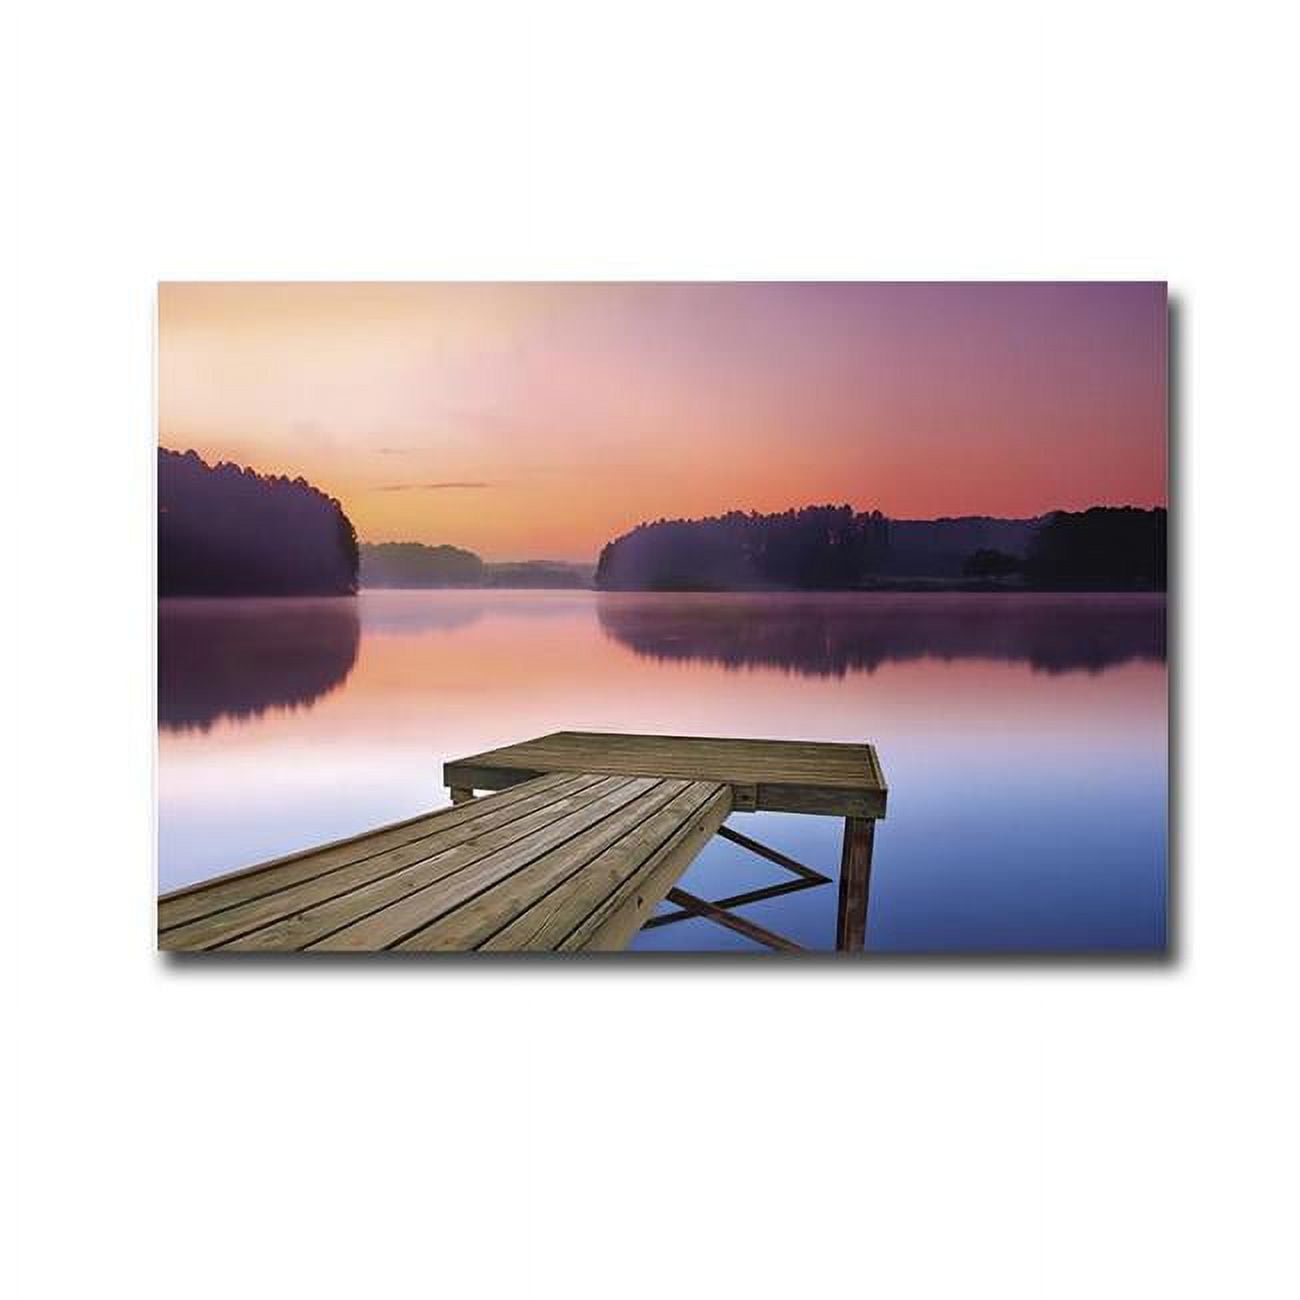 1624o449eg Morning Stillness By Darren Cook Premium Gallery-wrapped Canvas Giclee Art - 16 X 24 X 1.5 In.